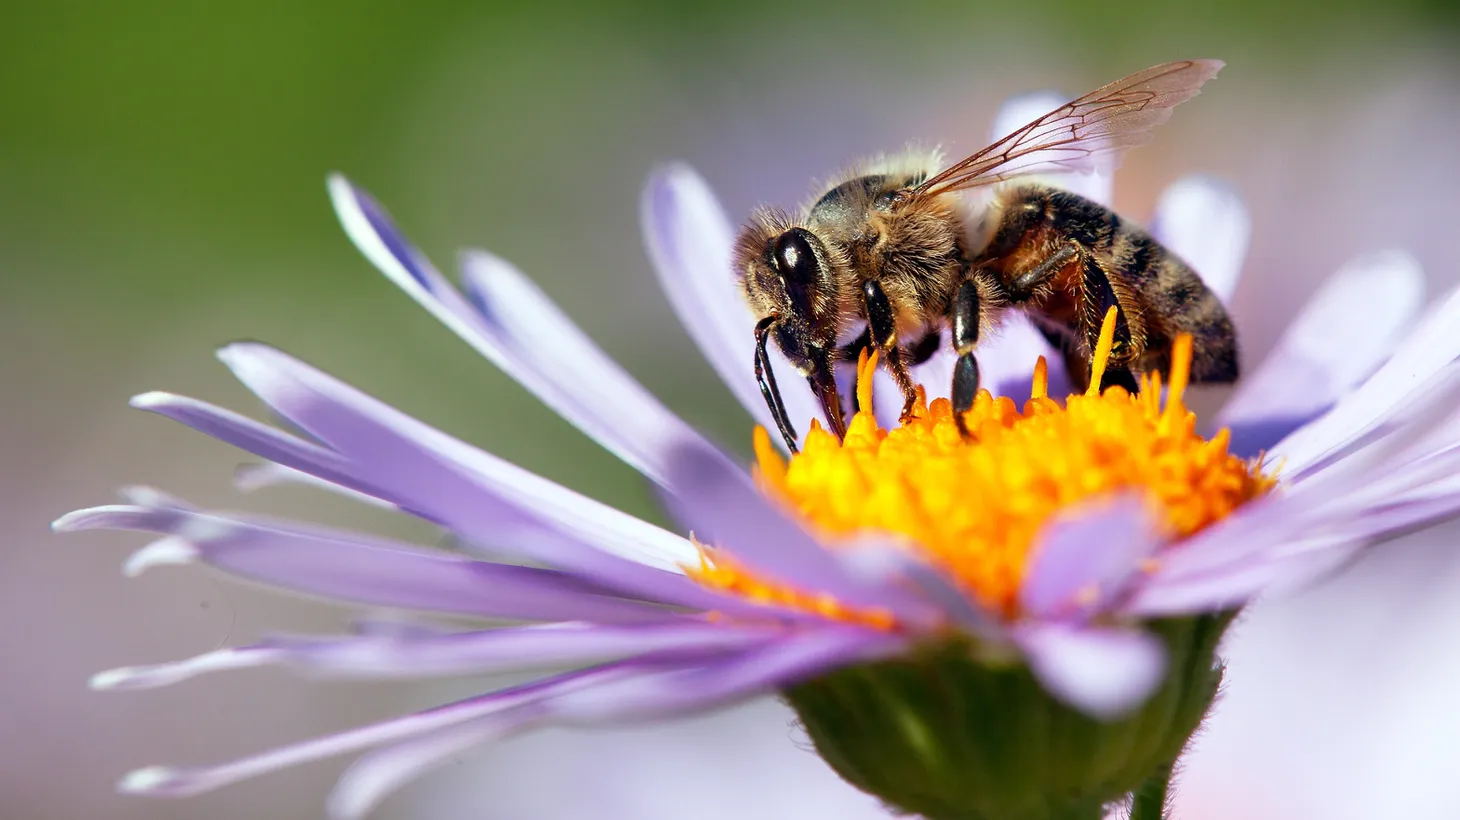 One third of the food humans eat relies on insect pollination, according to environmental journalist Oliver Milman. Bees have the ability to count and have been taught to play soccer.